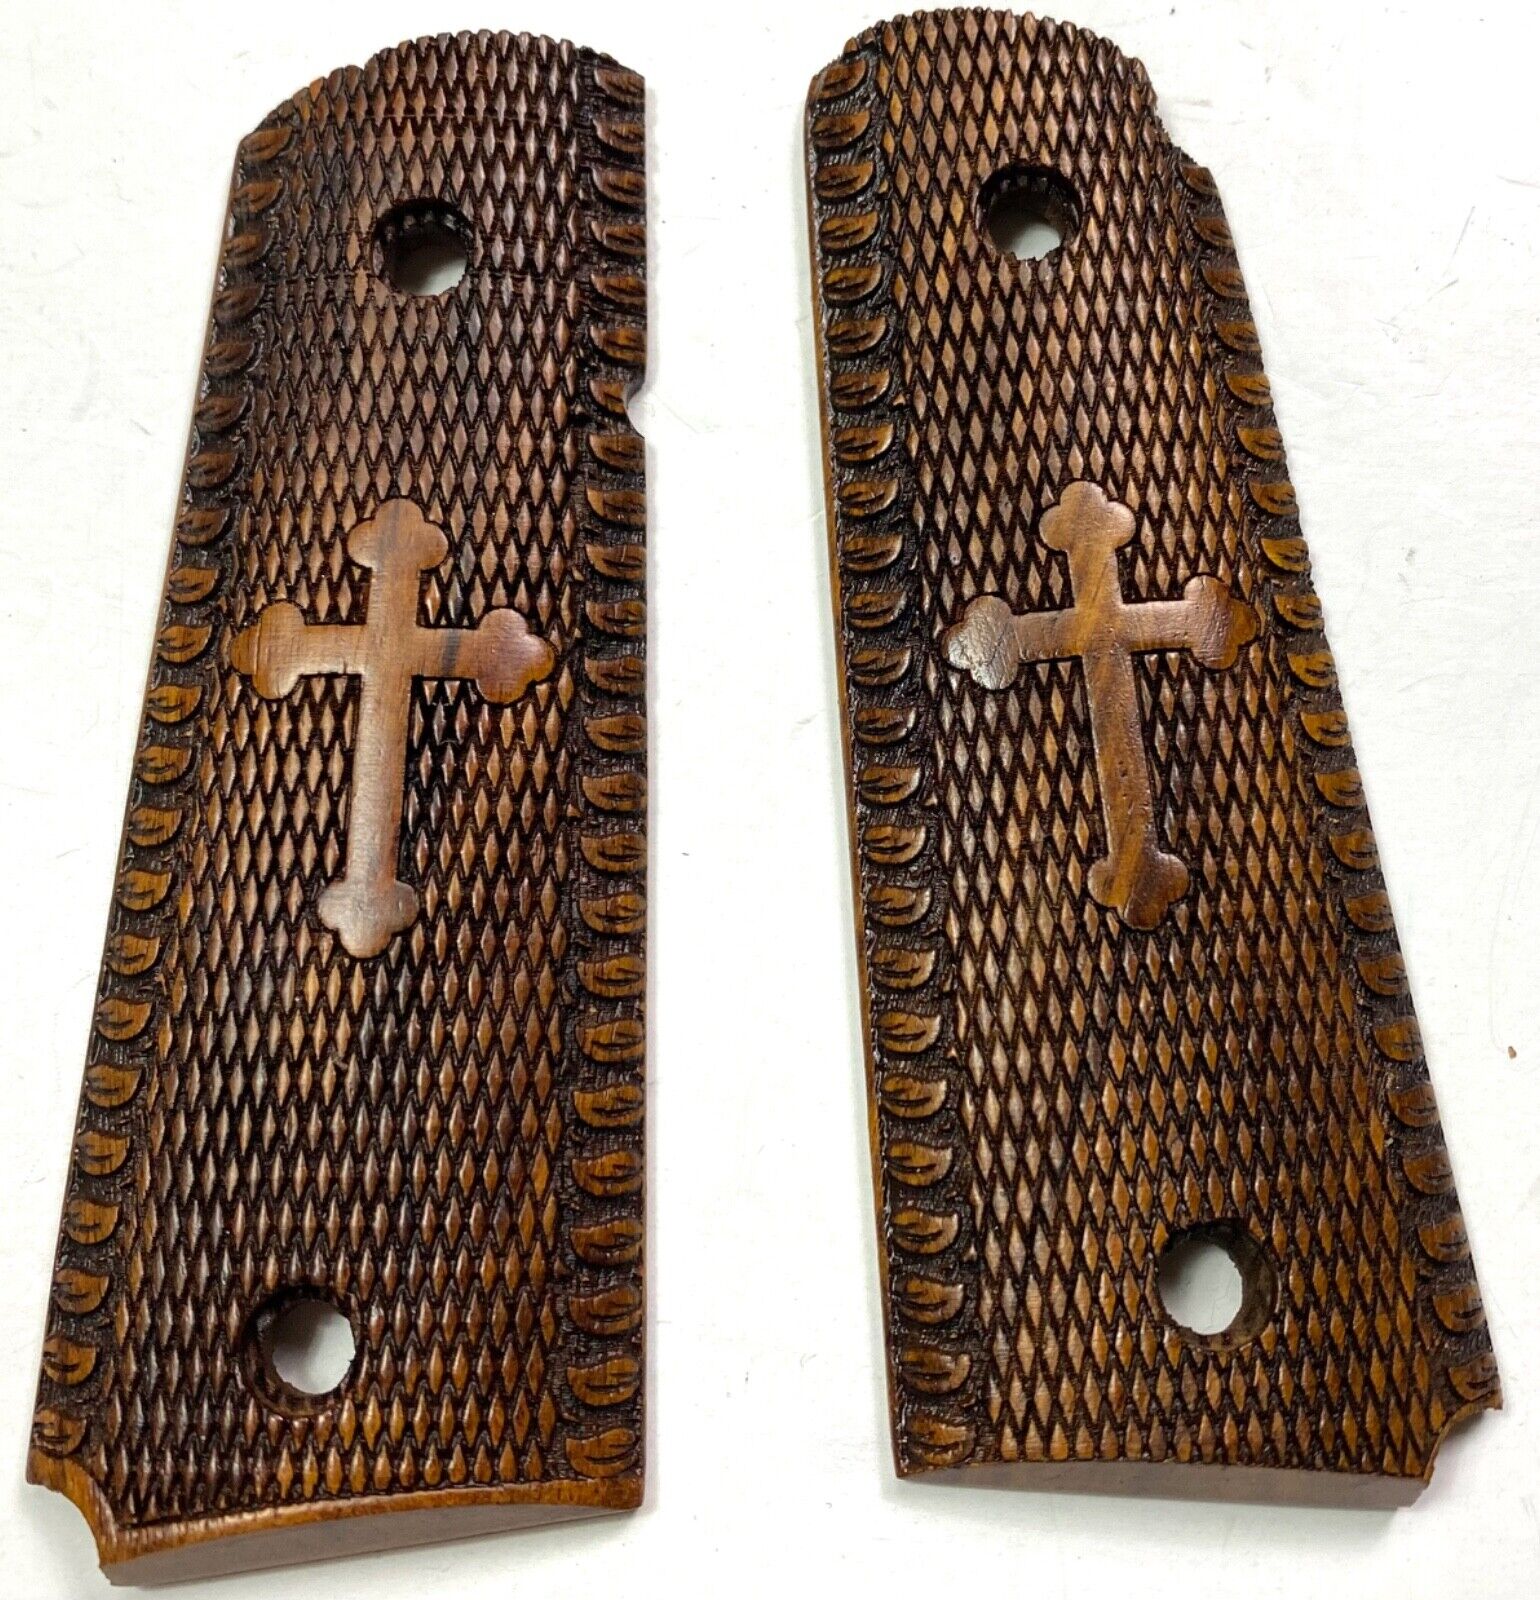 WWII WWI US ARMY COLT M1911 M1911A1 .45 WOODEN PISTOL GRIPS-CROSS DESIGN